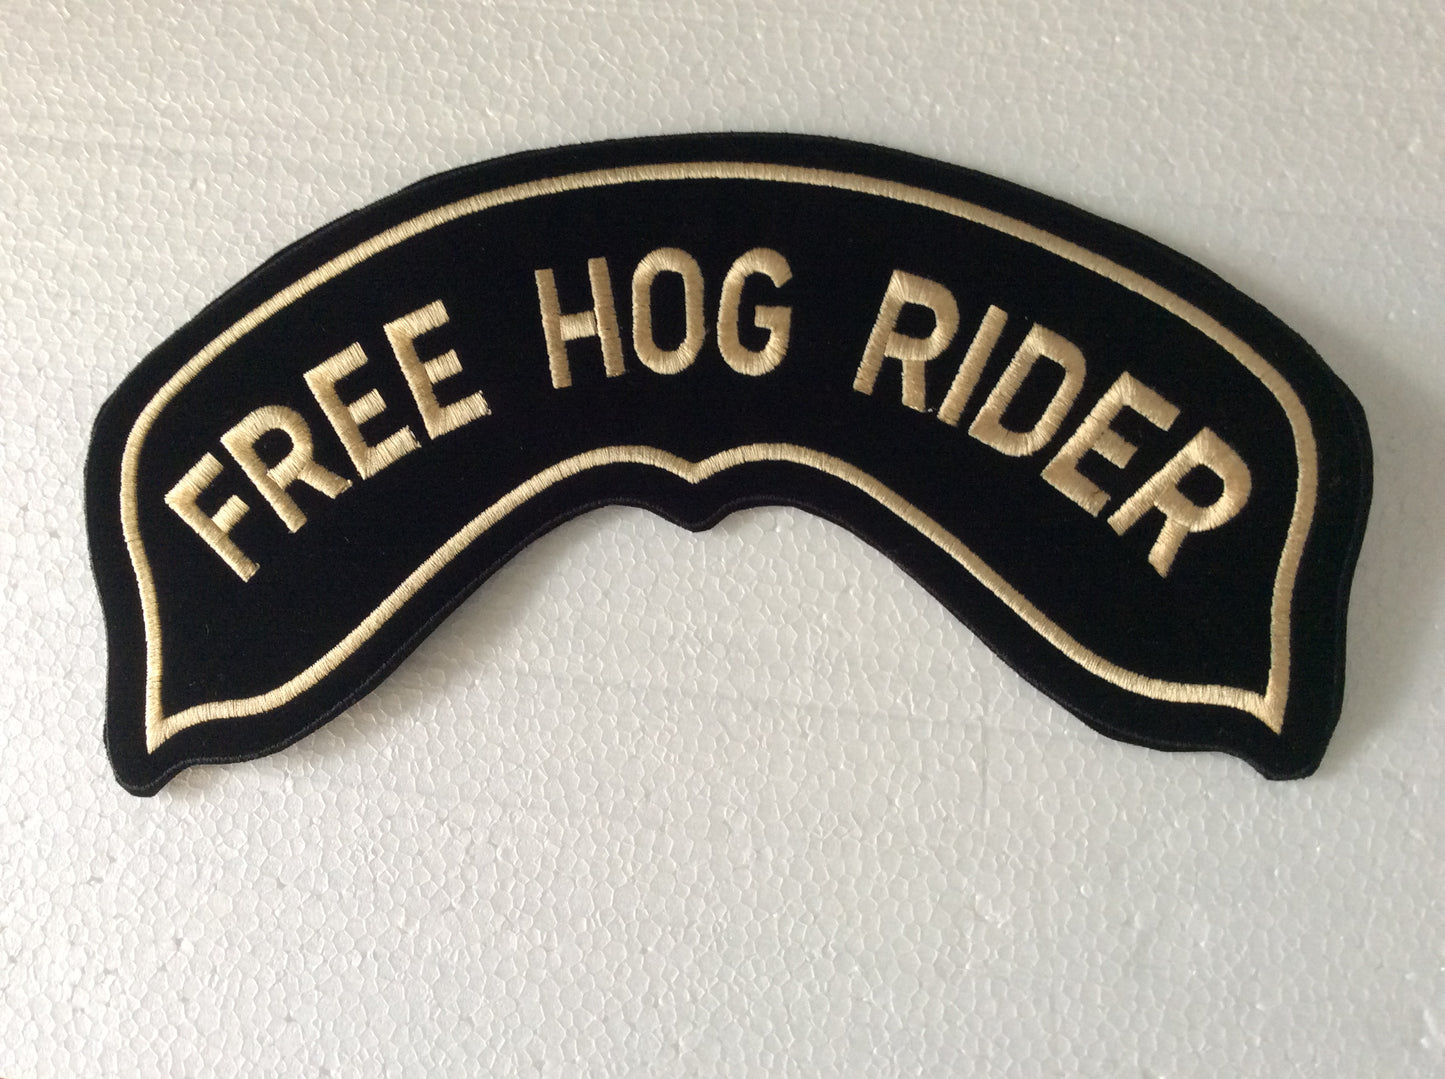 Grand Parche patch roker – FREE HOG RIDER –